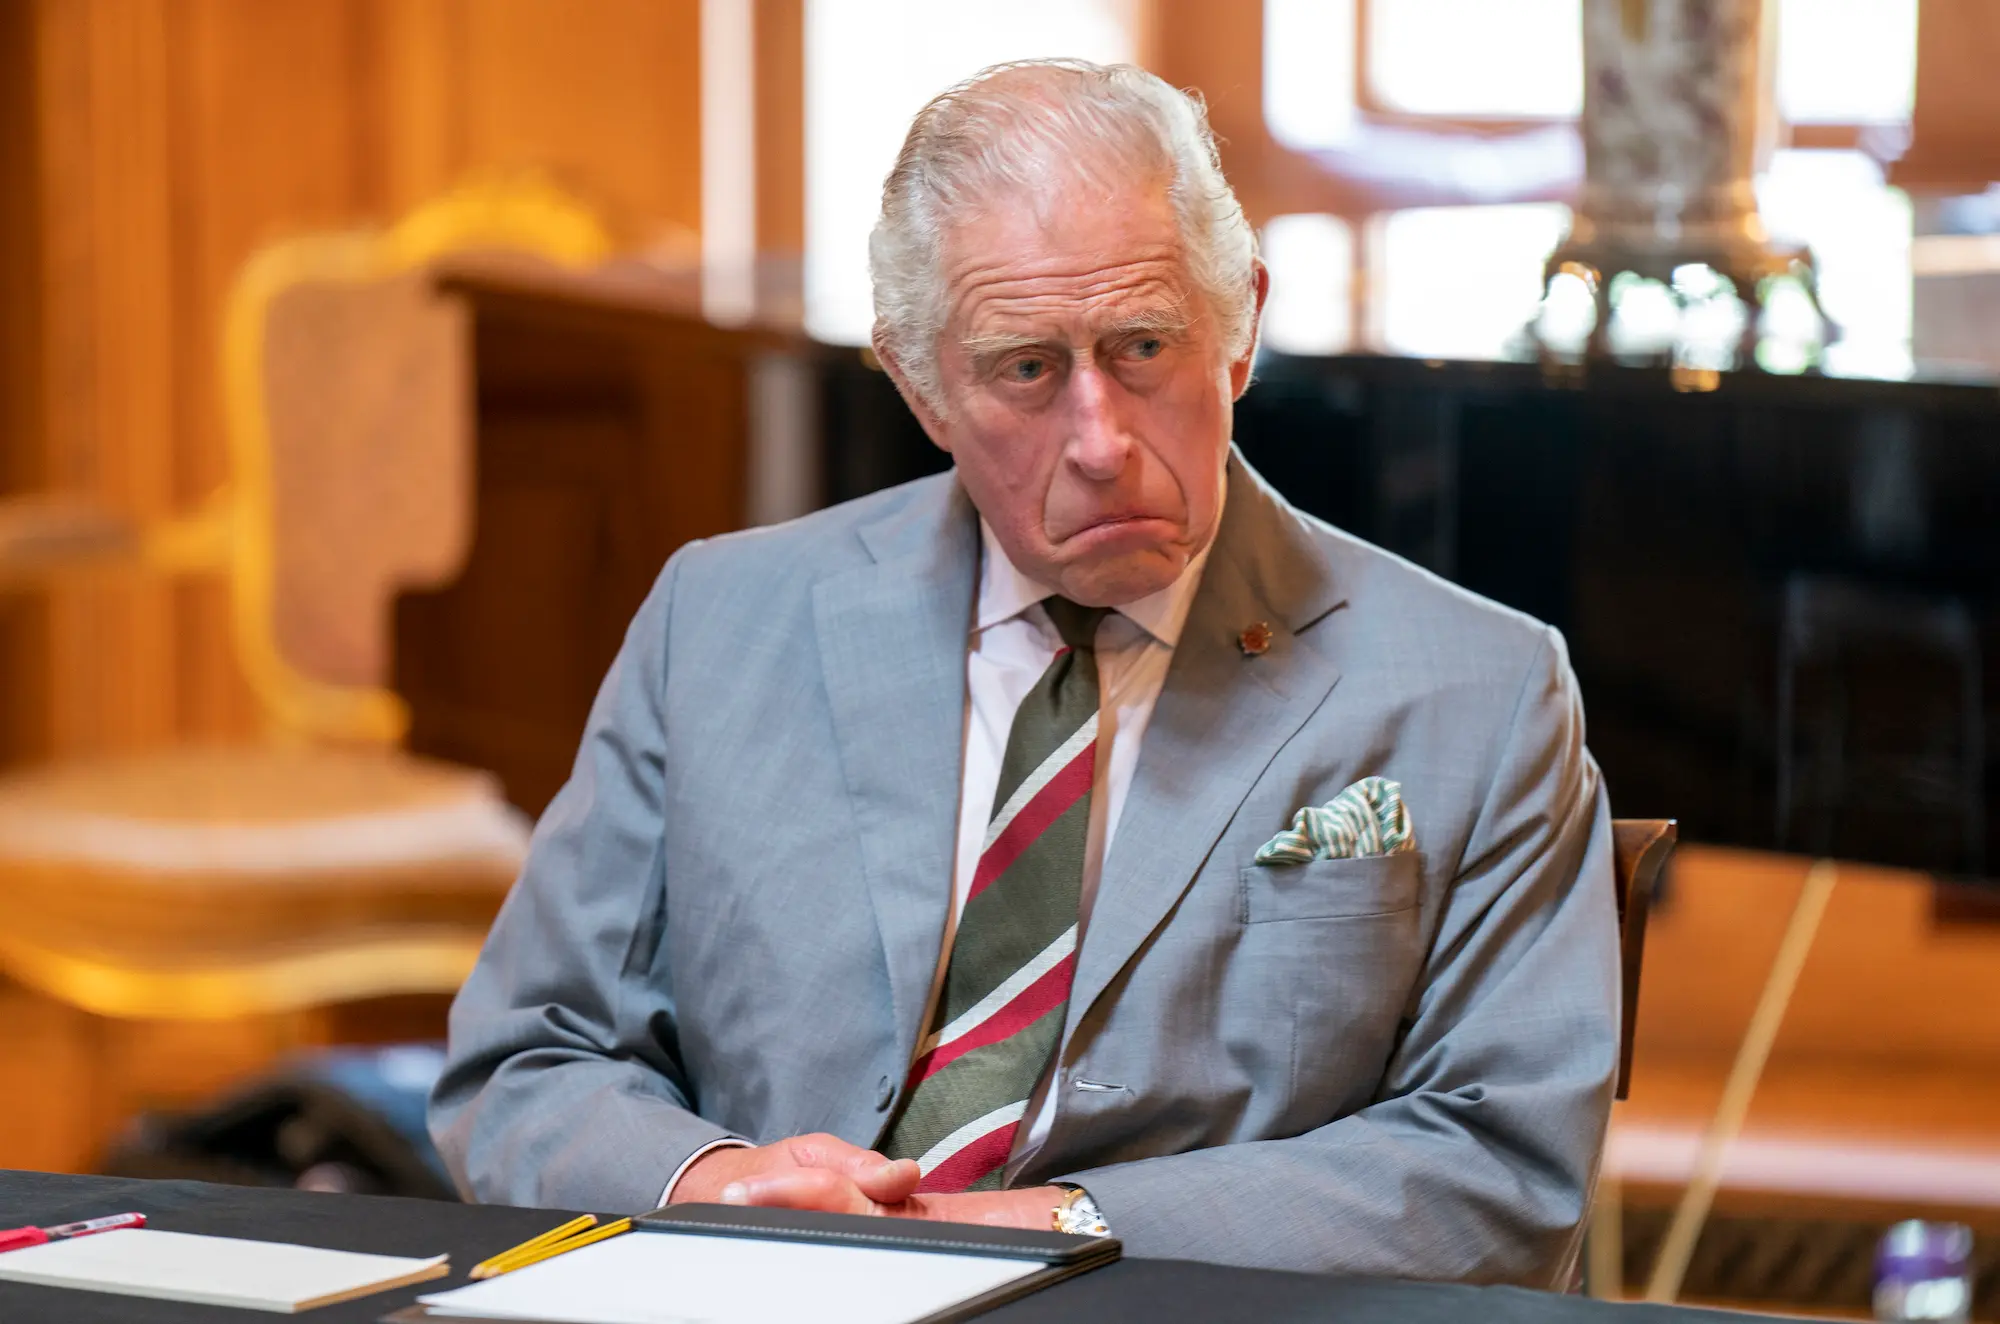 Le Prince Charles devient officiellement le Roi Charles III